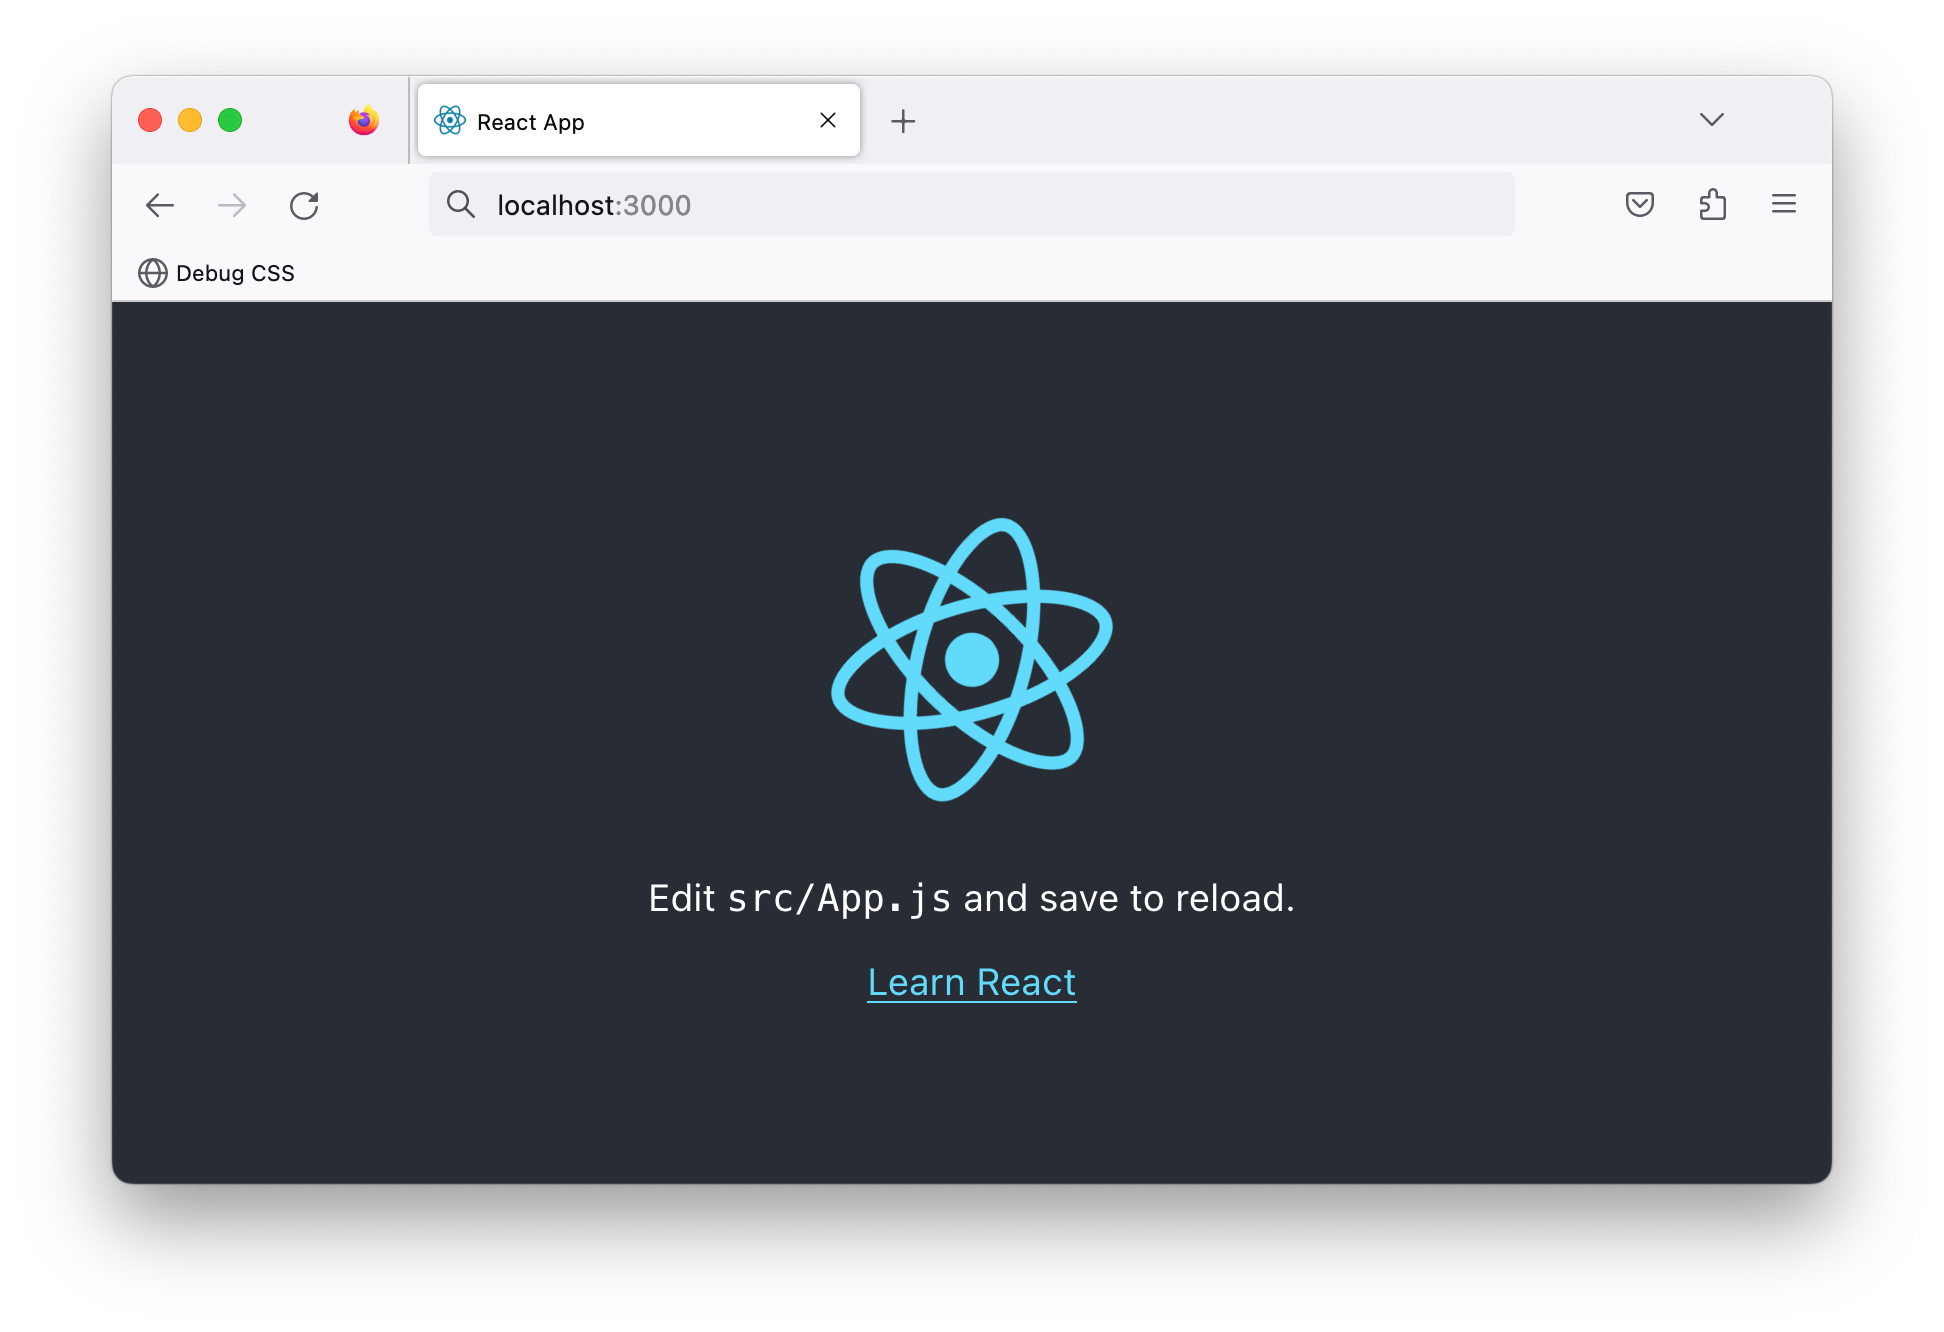 The React test application running in the browser.